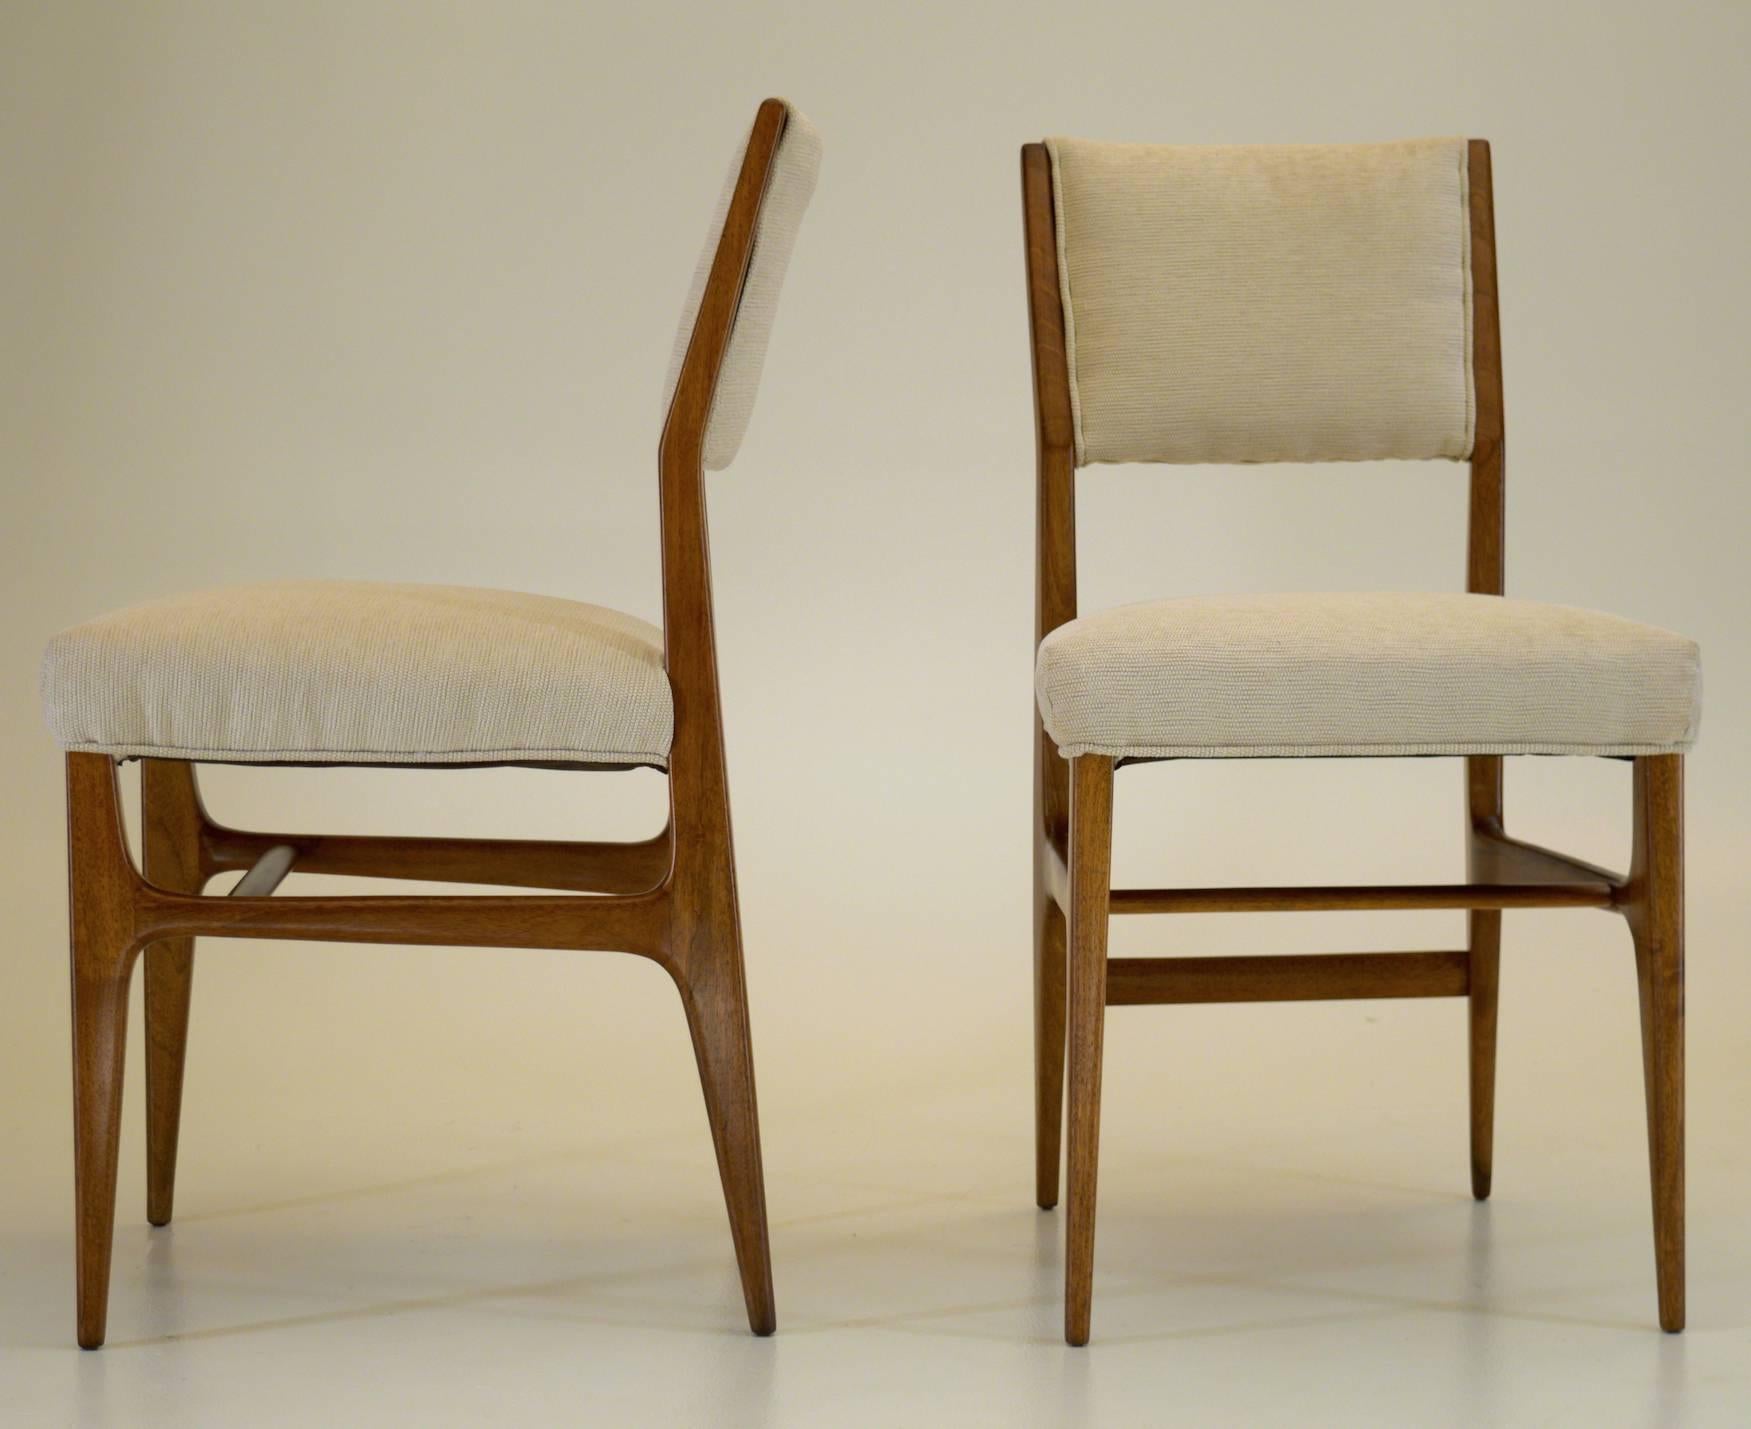 Italian Gio Ponti Dining Table and Four Chairs, 1951